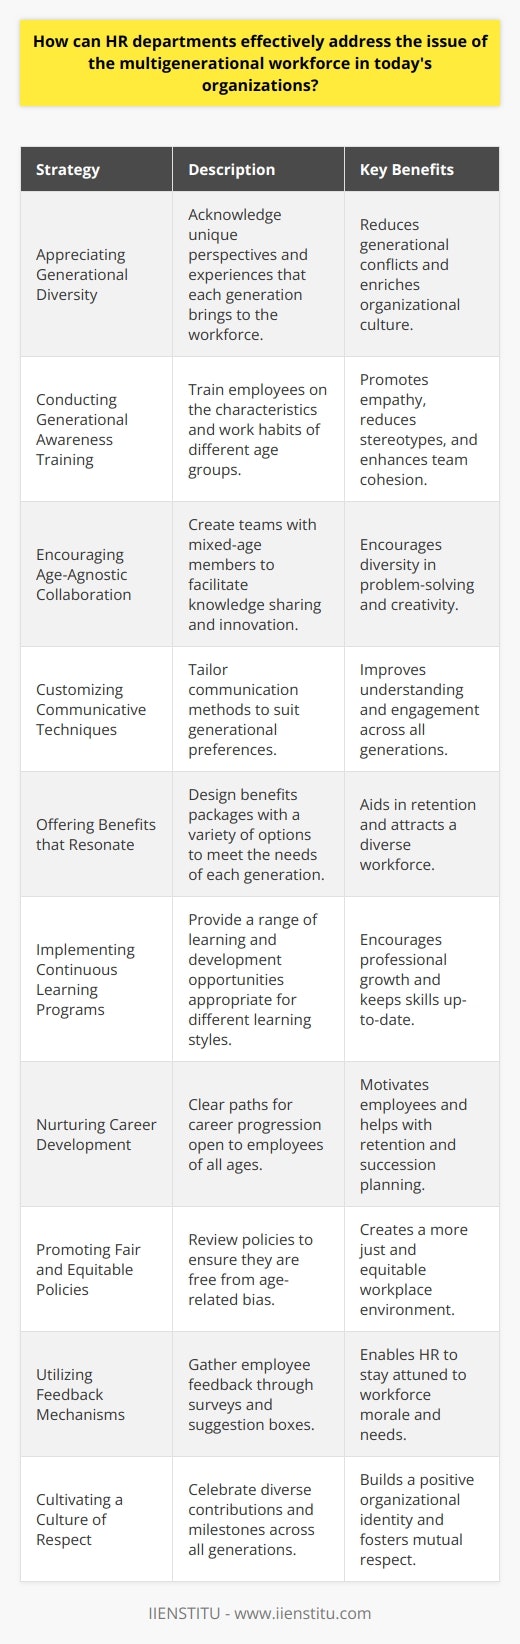 Managing a multigenerational workforce is a multifaceted challenge that requires HR departments to leverage a broad understanding of generational differences and to implement inclusive strategies. Here's how HR can effectively navigate this issue:1. Appreciating Generational Diversity: HR should start by acknowledging the unique perspectives and values that each generation brings to the table. From the Traditionalists and Baby Boomers to Generation X, Millennials, and Generation Z, each group has its own set of experiences and expectations that influence their approach to work.2. Conducting Generational Awareness Training: Organizations can benefit from generational awareness programs that educate all employees about the characteristics and work habits of different age cohorts. This training encourages empathy and understanding, helping to minimize misconceptions and stereotypes.3. Encouraging Age-Agnostic Collaboration: HR departments can facilitate projects and teams that mix employees of different ages, fostering an inclusive environment where knowledge sharing and innovation occur naturally, free from age bias.4. Customizing Communicative Techniques: Understanding that each generation may have preferred methods of communication, HR can customize their outreach efforts—whether it’s through face-to-face discussions, emails, or instant messaging—to ensure effective and inclusive communication.5. Offering Benefits that Resonate: An attractive benefits package is not one-size-fits-all. Flexible schedules, remote work options, healthcare plans, and retirement contributions are examples of benefits that might appeal more to certain generational groups but must be balanced to serve all employees.6. Implementing Continuous Learning Programs: Lifelong learning is key in today’s fast-paced work environment. HR departments should facilitate continuous learning opportunities that cater to different learning preferences—be it micro-learning platforms, traditional seminars, or collaborative workshops.7. Nurturing Career Development: By providing clear paths for career development that are accessible to employees of all ages, HR departments can help motivate and retain talent. Career coaching and succession planning are important in showing that growth and development are possible at every stage.8. Promoting Fair and Equitable Policies: When reviewing policies, HR should ensure that they are free from age-related bias and provide equal opportunities for employees, regardless of their generational identity.9. Utilizing Feedback Mechanisms: HR departments can keep their finger on the pulse of the organization’s culture by employing feedback mechanisms such as surveys or suggestion boxes that can be easily accessed and are responsive to the needs of a diverse workforce.10. Cultivating a Culture of Respect: Above all, cultivating a culture of respect where the contributions of all generations are valued is paramount. HR can drive initiatives that celebrate milestones, recognizing the diverse expertise and achievements of the workforce.In conclusion, HR departments can successfully manage a multigenerational workforce by fostering a culture of inclusivity, open communication, continuous learning, and respect for individual contributions. Through tailored approaches that acknowledge and leverage generational diversity, organizations can create a harmonious and productive workplace.